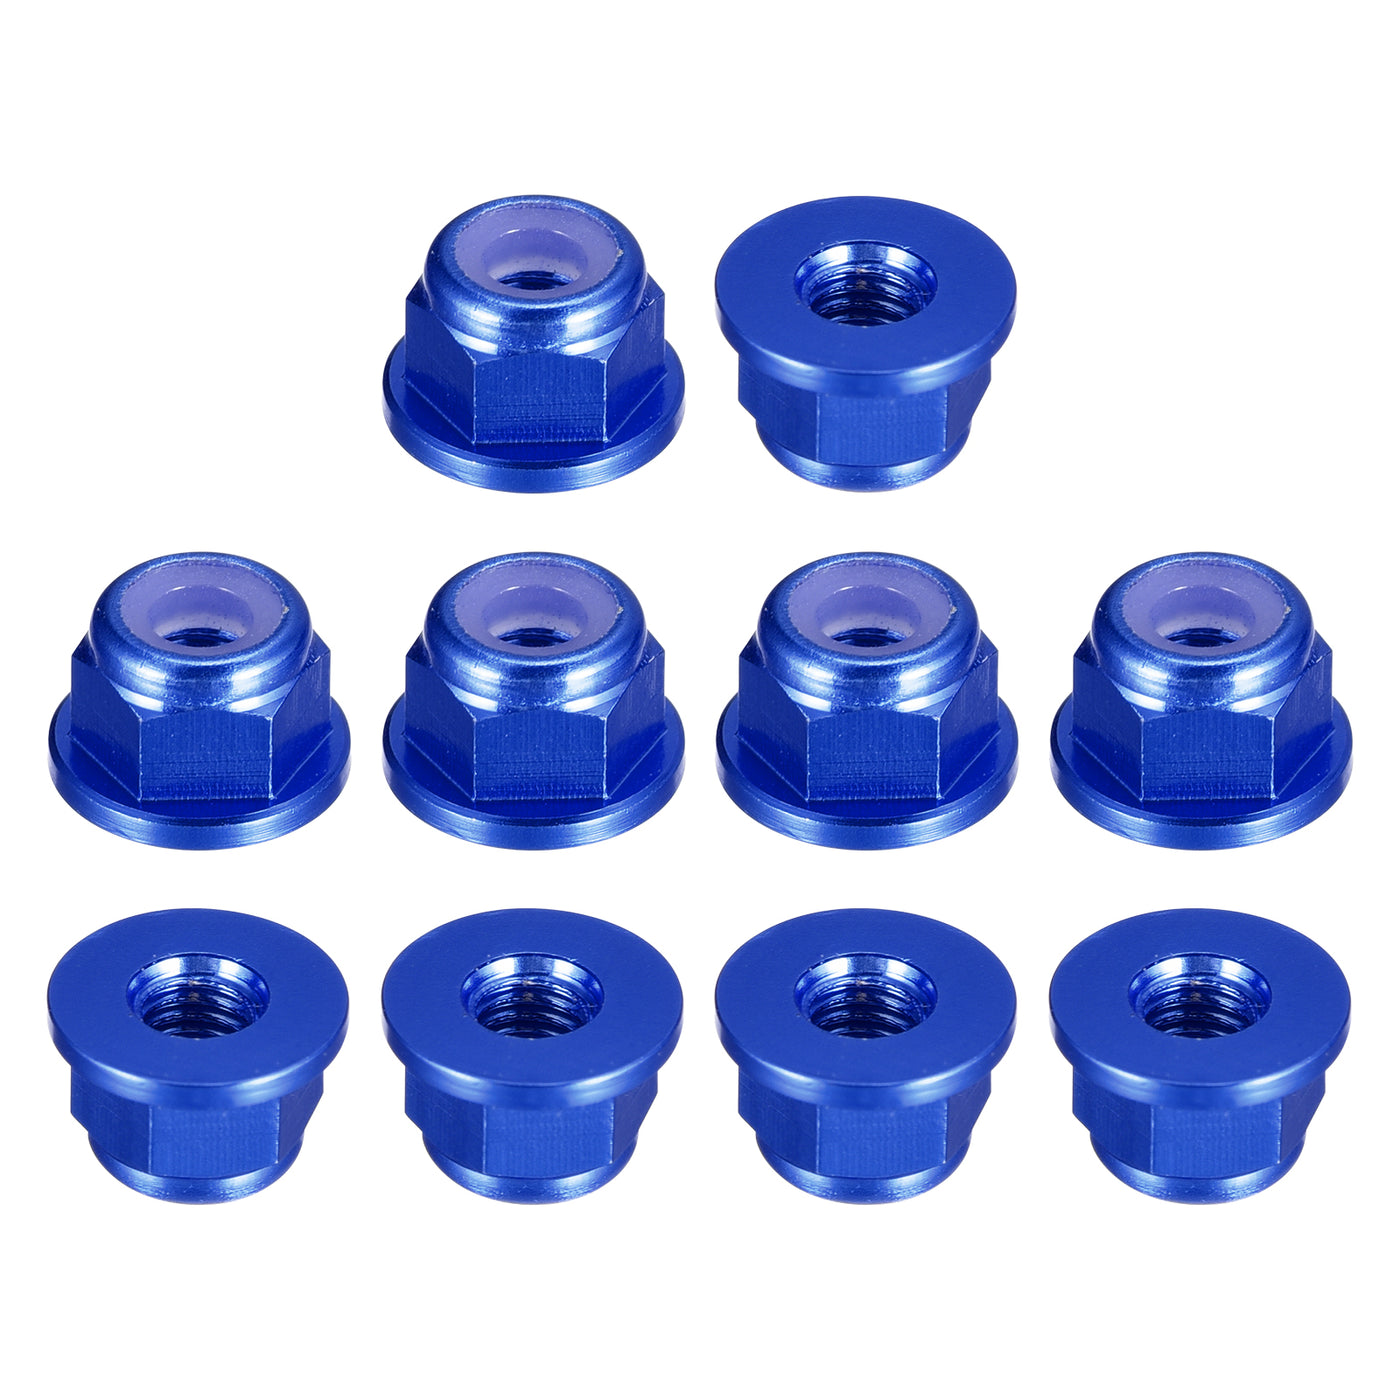 uxcell Uxcell Nylon Insert Hex Lock Nuts, 10pcs - M3 x 0.5mm Aluminum Alloy Self-Locking Nut, Anodizing Flange Lock Nut for Fasteners (Sapphire Blue)